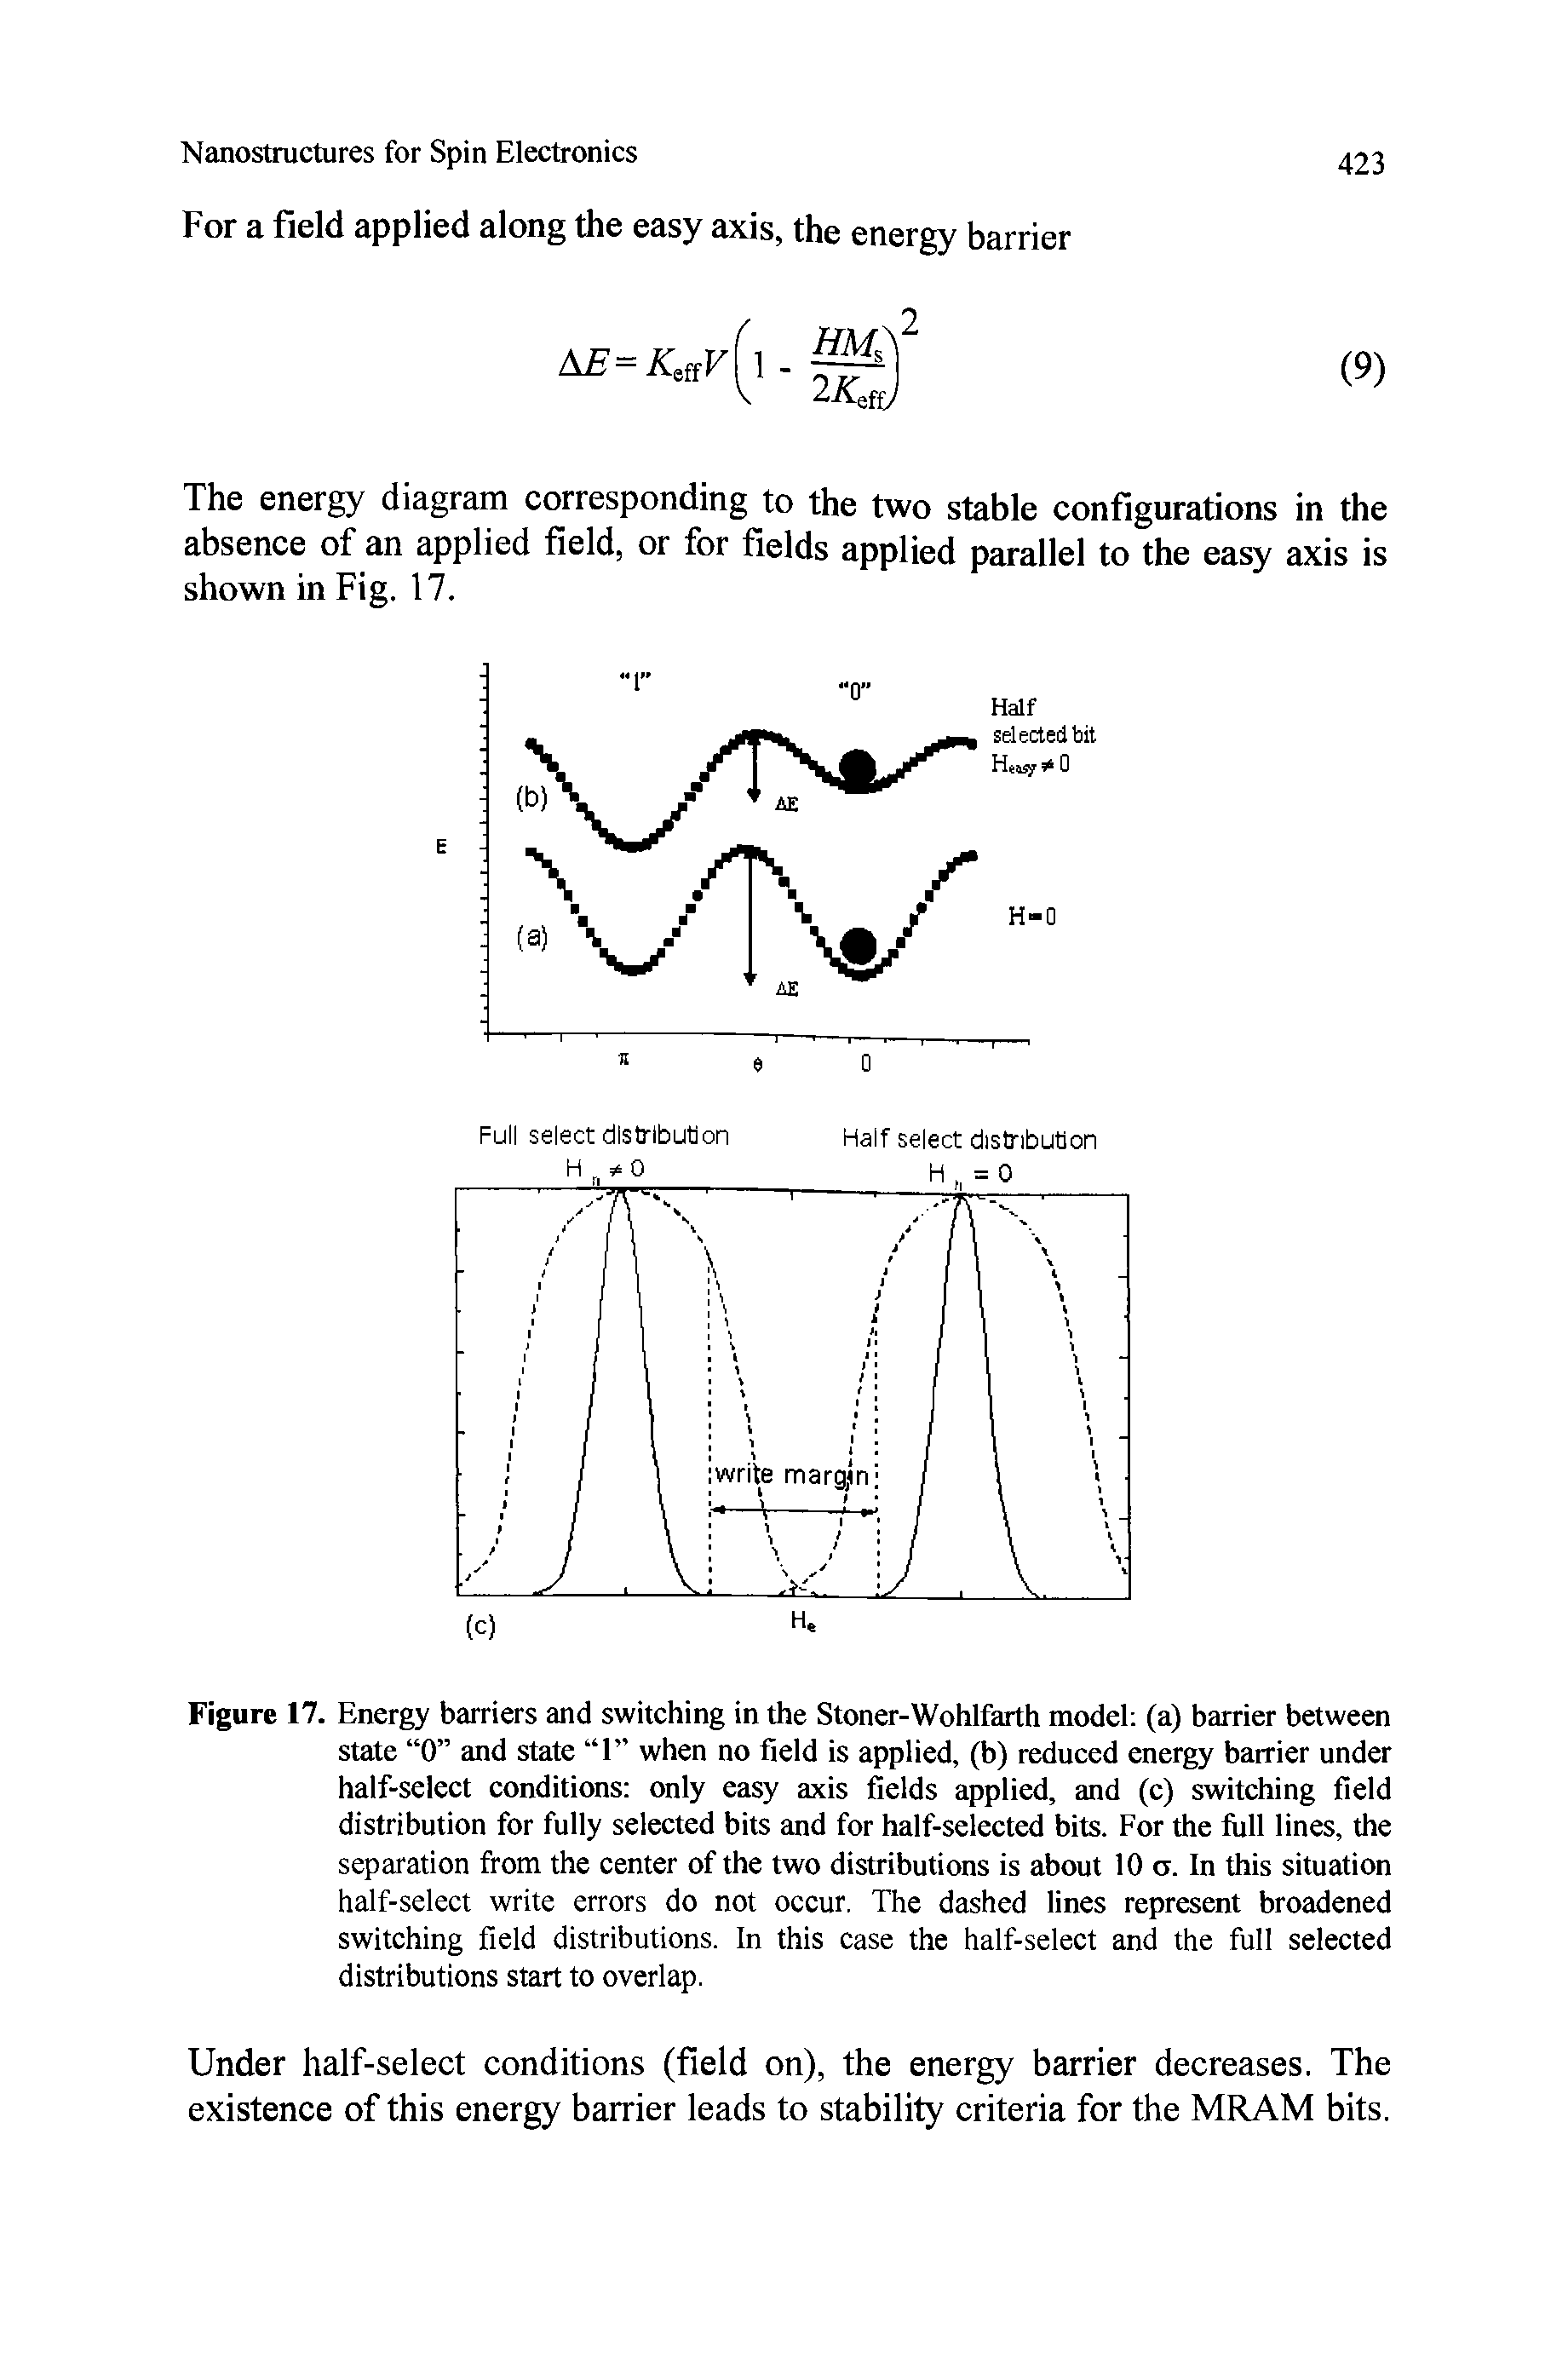 Figure 17. Energy barriers and switching in the Stoner-Wohlfarth model (a) barrier between state 0 and state 1 when no field is applied, (b) reduced energy barrier under half-select conditions only easy axis fields applied, and (c) switching field distribution for fully selected bits and for half-selected bits. For the full lines, the separation from the center of the two distributions is about 10 o. In this situation half-select write errors do not occur. The dashed lines represent broadened switching field distributions. In this case the half-select and the full selected distributions start to overlap.